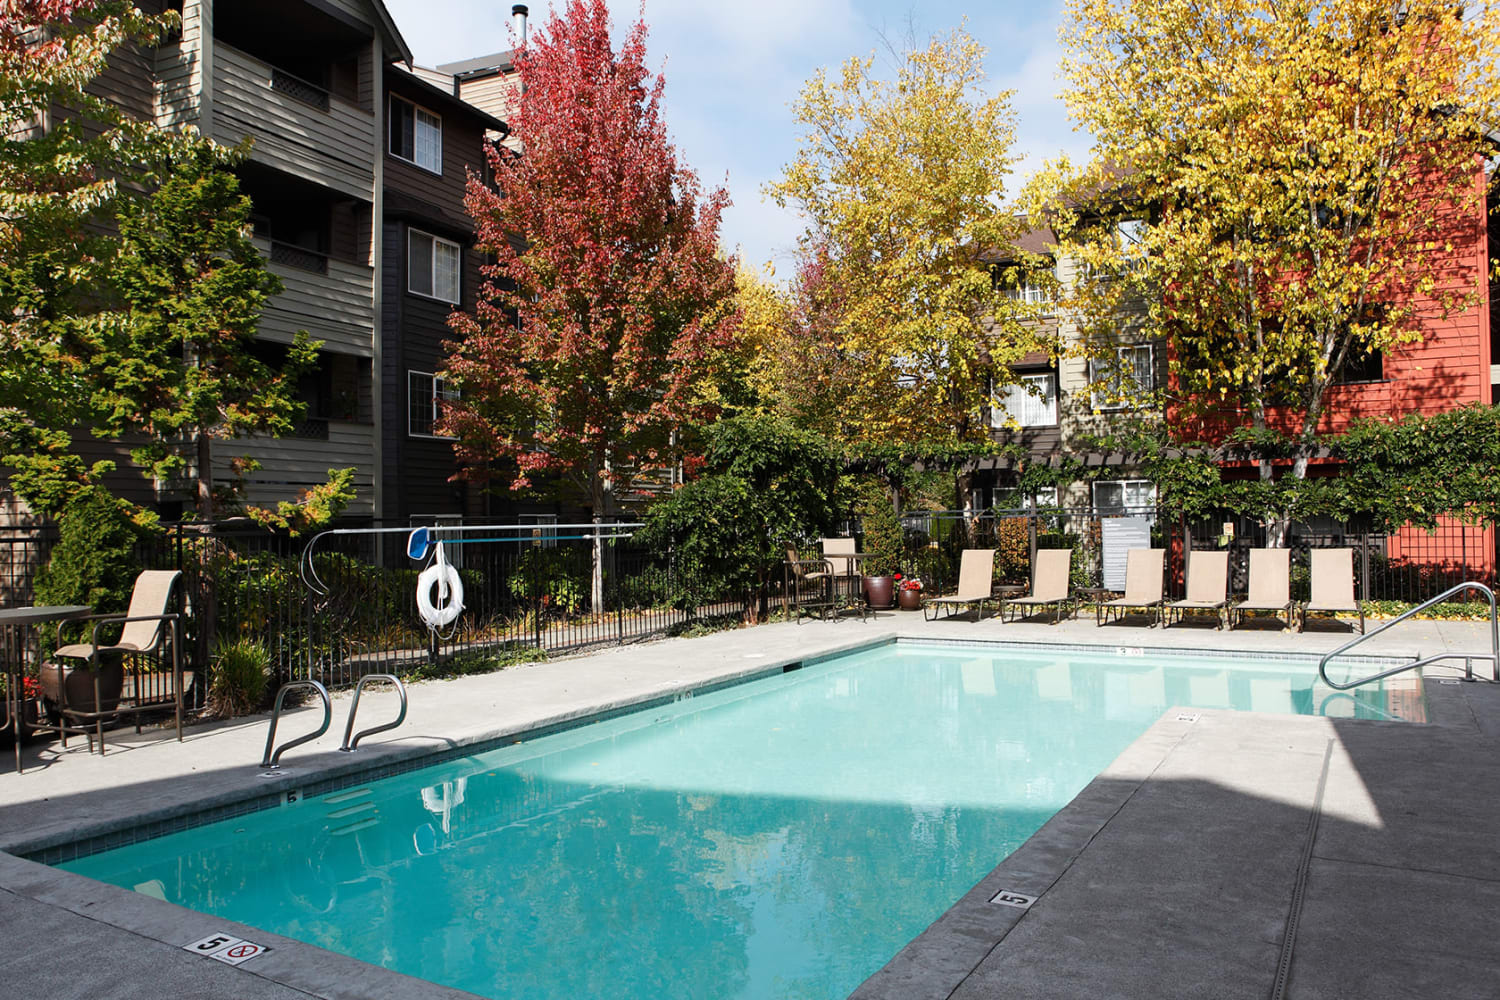 Beautiful pool with pretty trees nearby at Redmond Place Apartments in Redmond, Washington